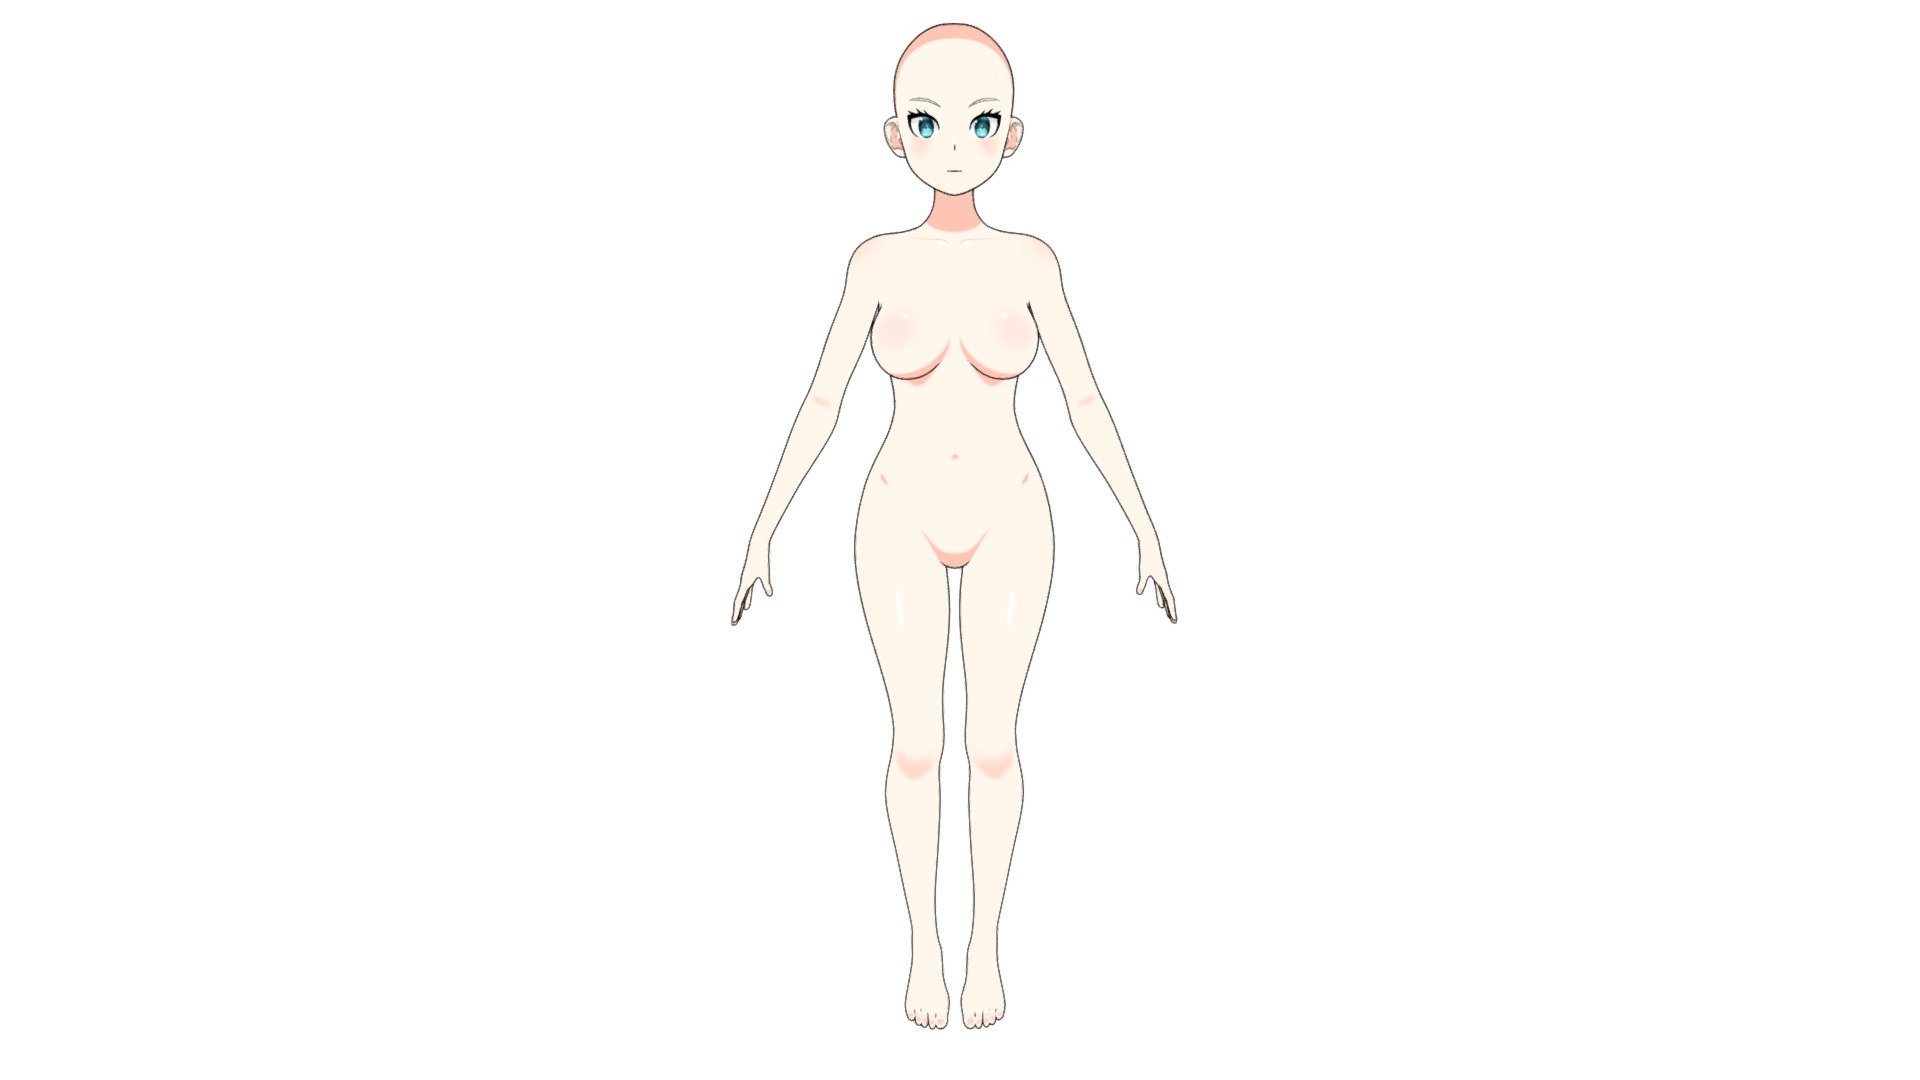 Base for starting your own anime models.

Contains:




.Blend (Blender 3.5)

.Textures

.Rigged(Auto rig pro)

1x Female base v2 - FULLBODY: Click here

1x Female base v3 - FULLBODY: Click here

3x Female bases - FULLBODY: Click here




fix shoulder distortion - 02/06/2023

Video Demo - Manipulating the model in Blender : Click here

Anime male - base mesh : Click here 

Subdivision and soliday disabled:

 - Anime Girl - Base Mesh - Buy Royalty Free 3D model by LessaB3D 3d model